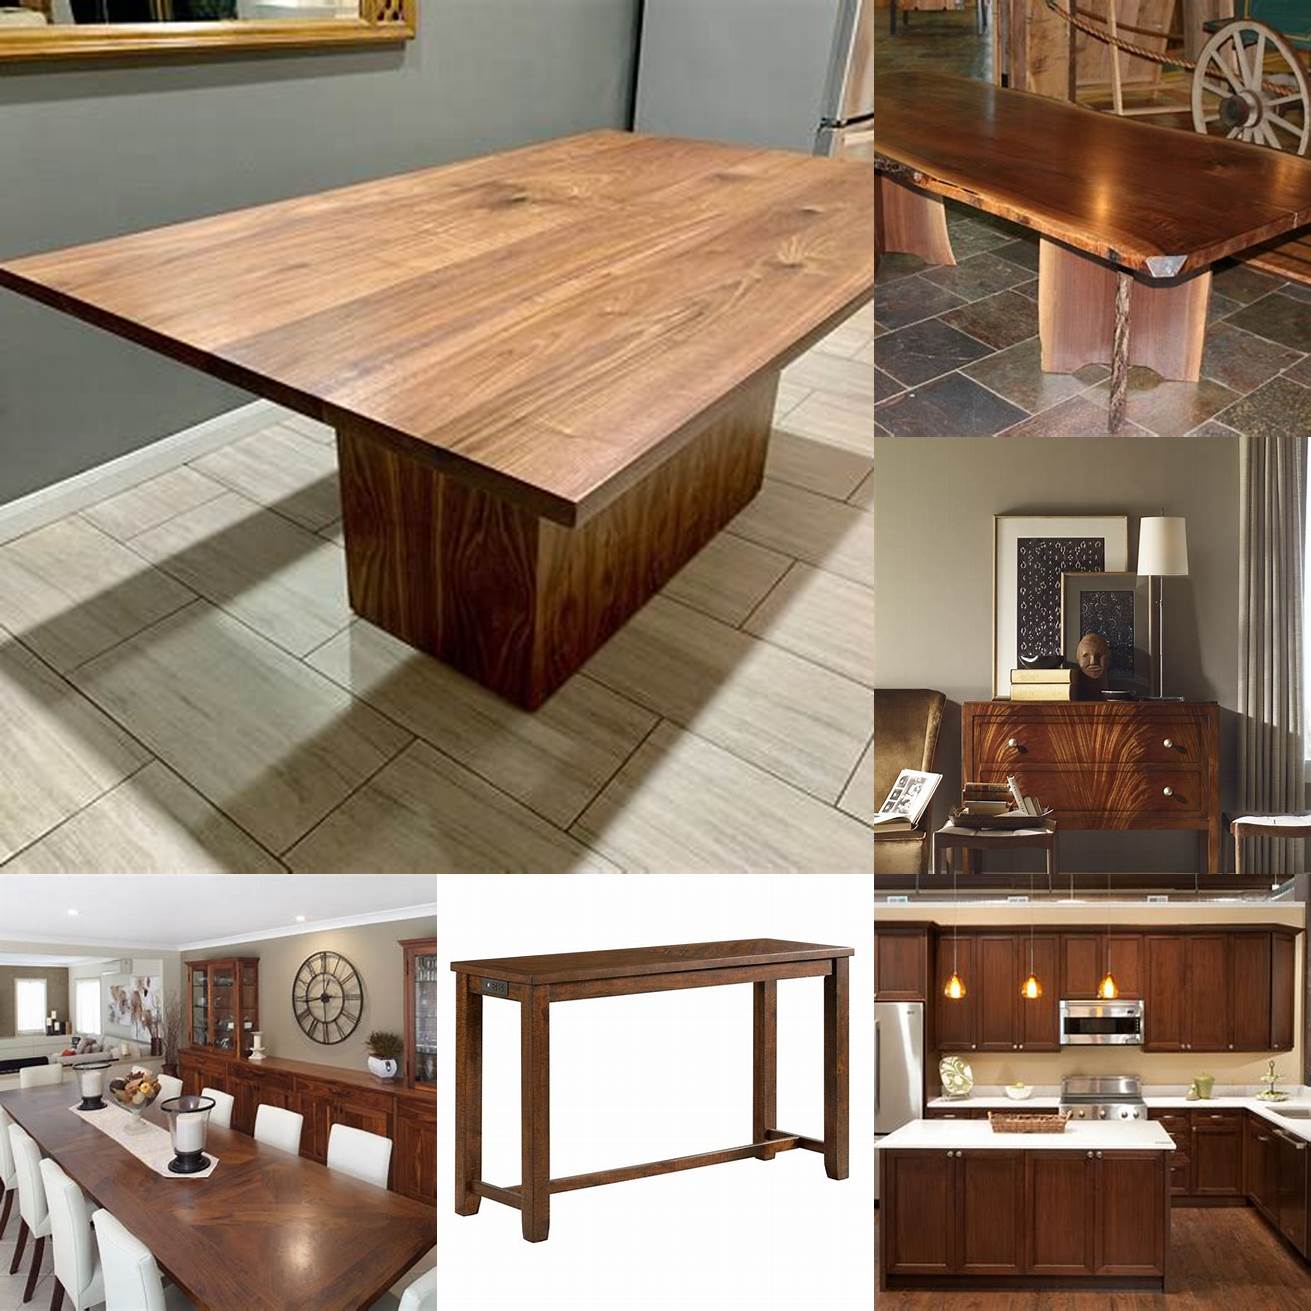 3 Versatility Walnut furniture can be incorporated into a variety of styles from traditional to modern